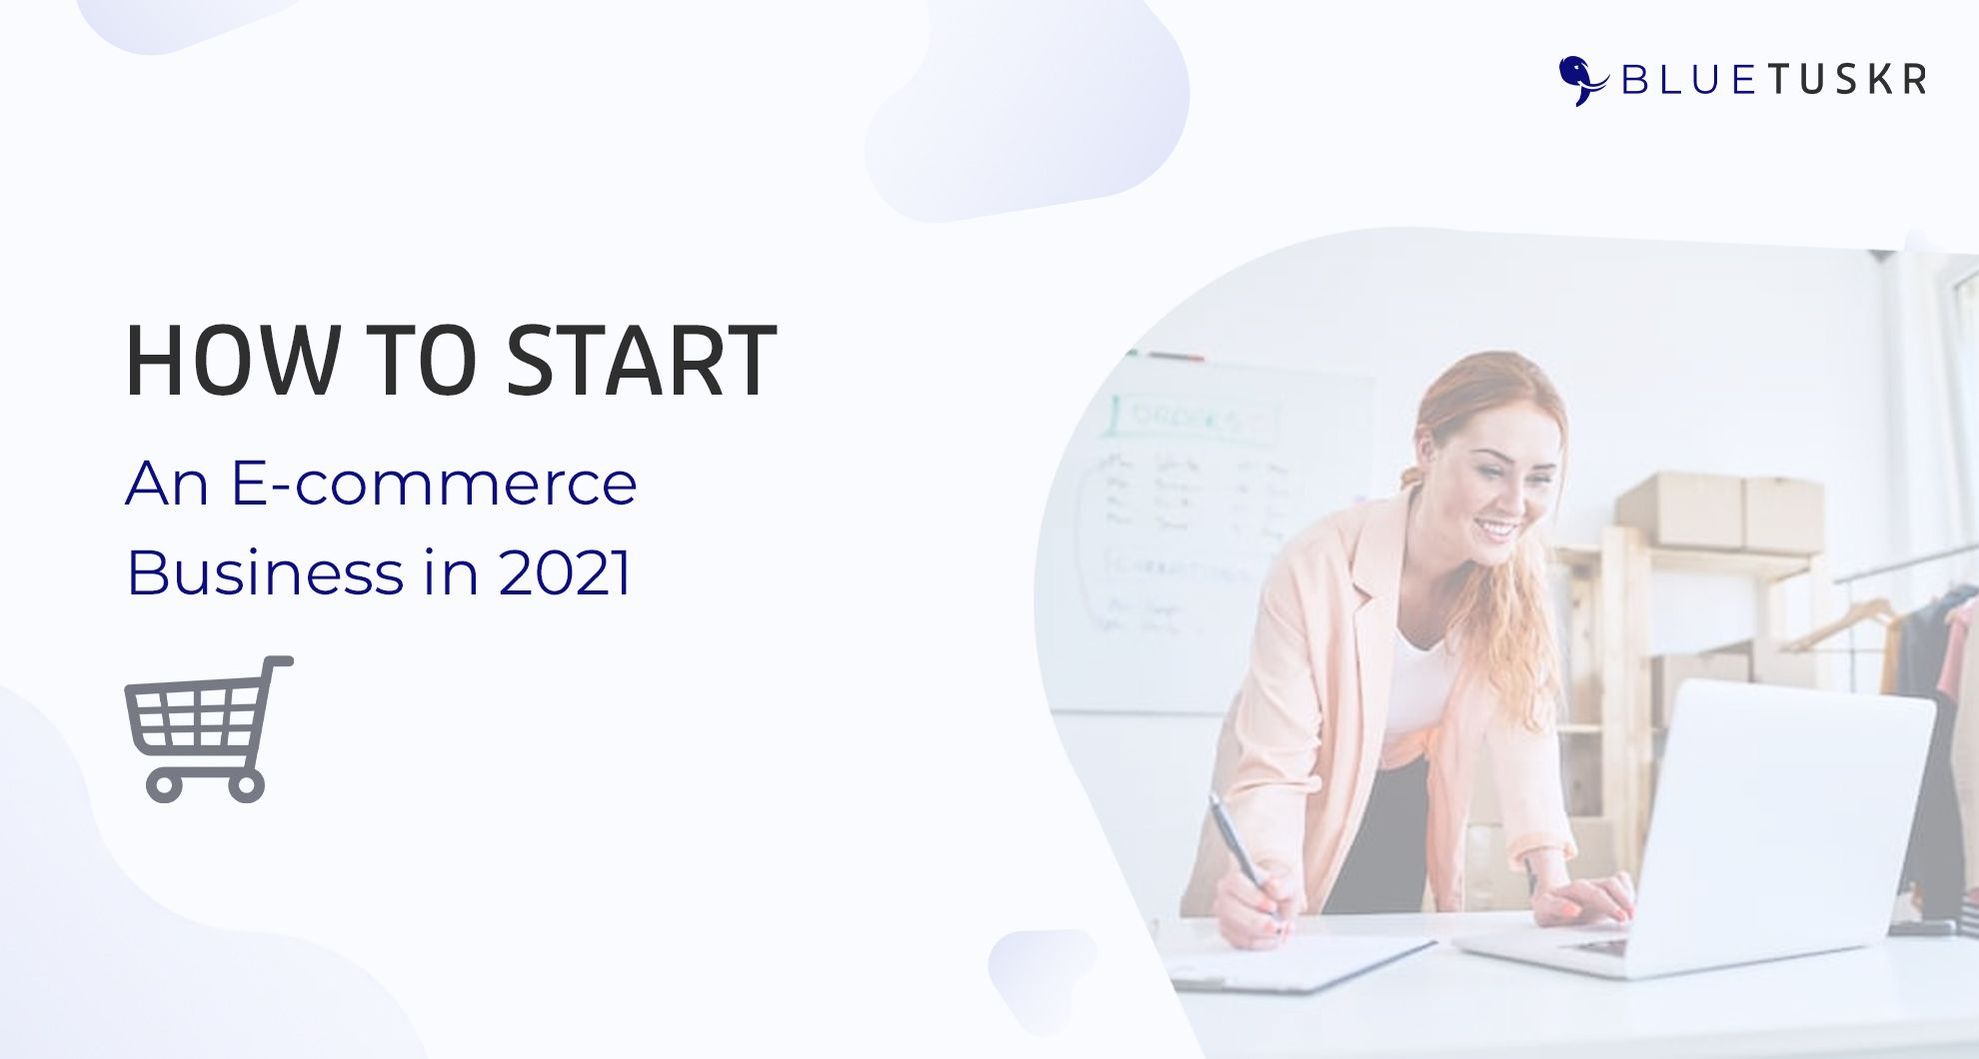 How to Start an E-commerce Business in 2021